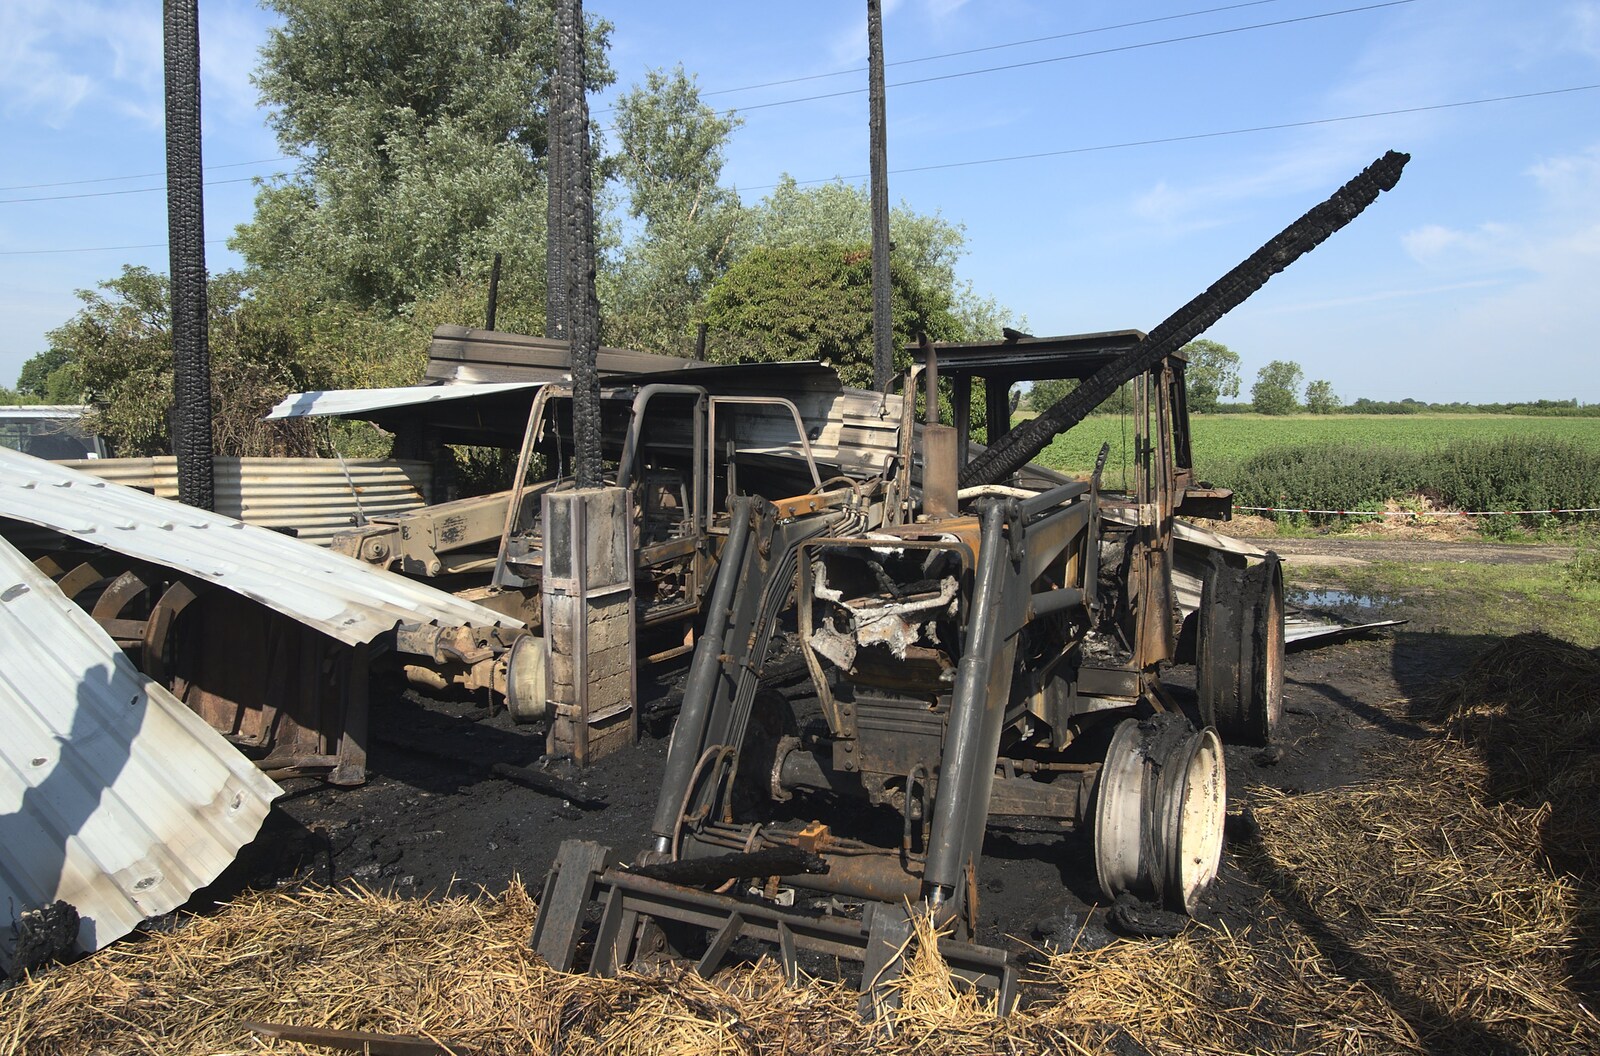 A destroyed tractor from A Fire at Valley Farm, Thrandeston, Suffolk - 24th June 2009